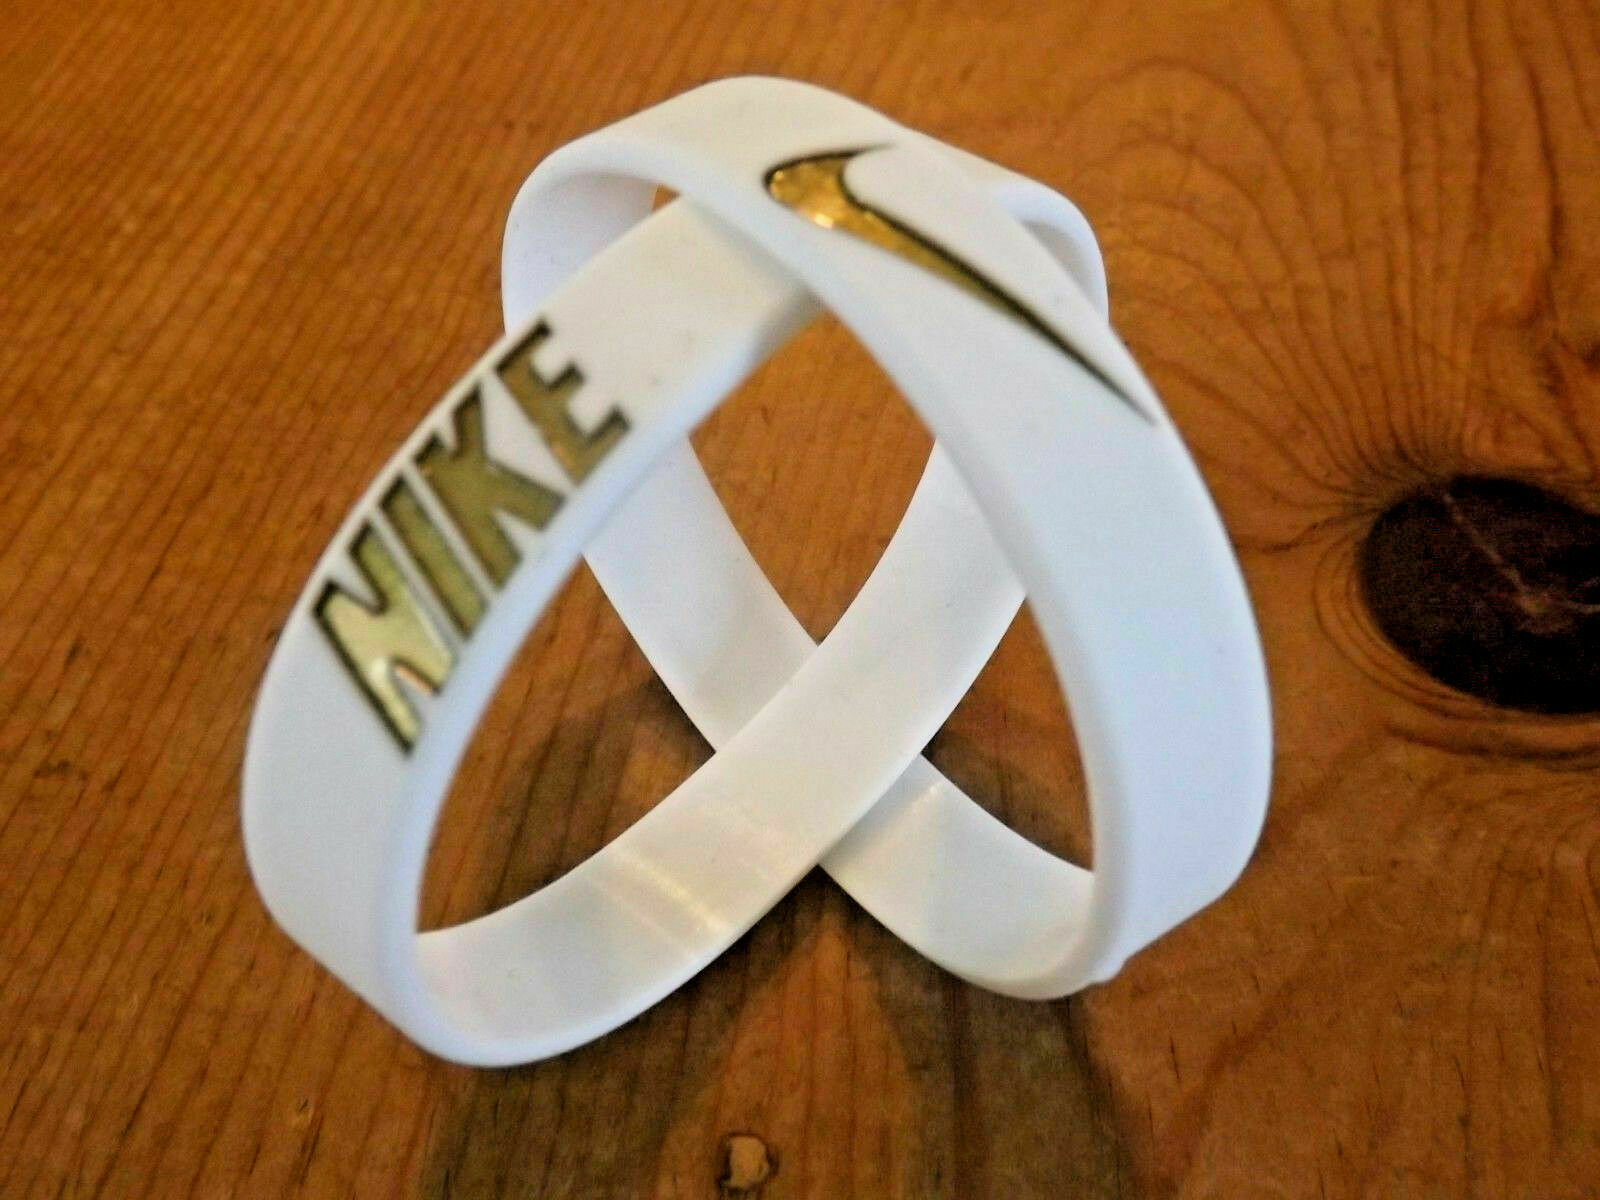 Nike Baller Band Silicone Rubber Bracelet White Gold Dubraes ⚡️ Best Rated